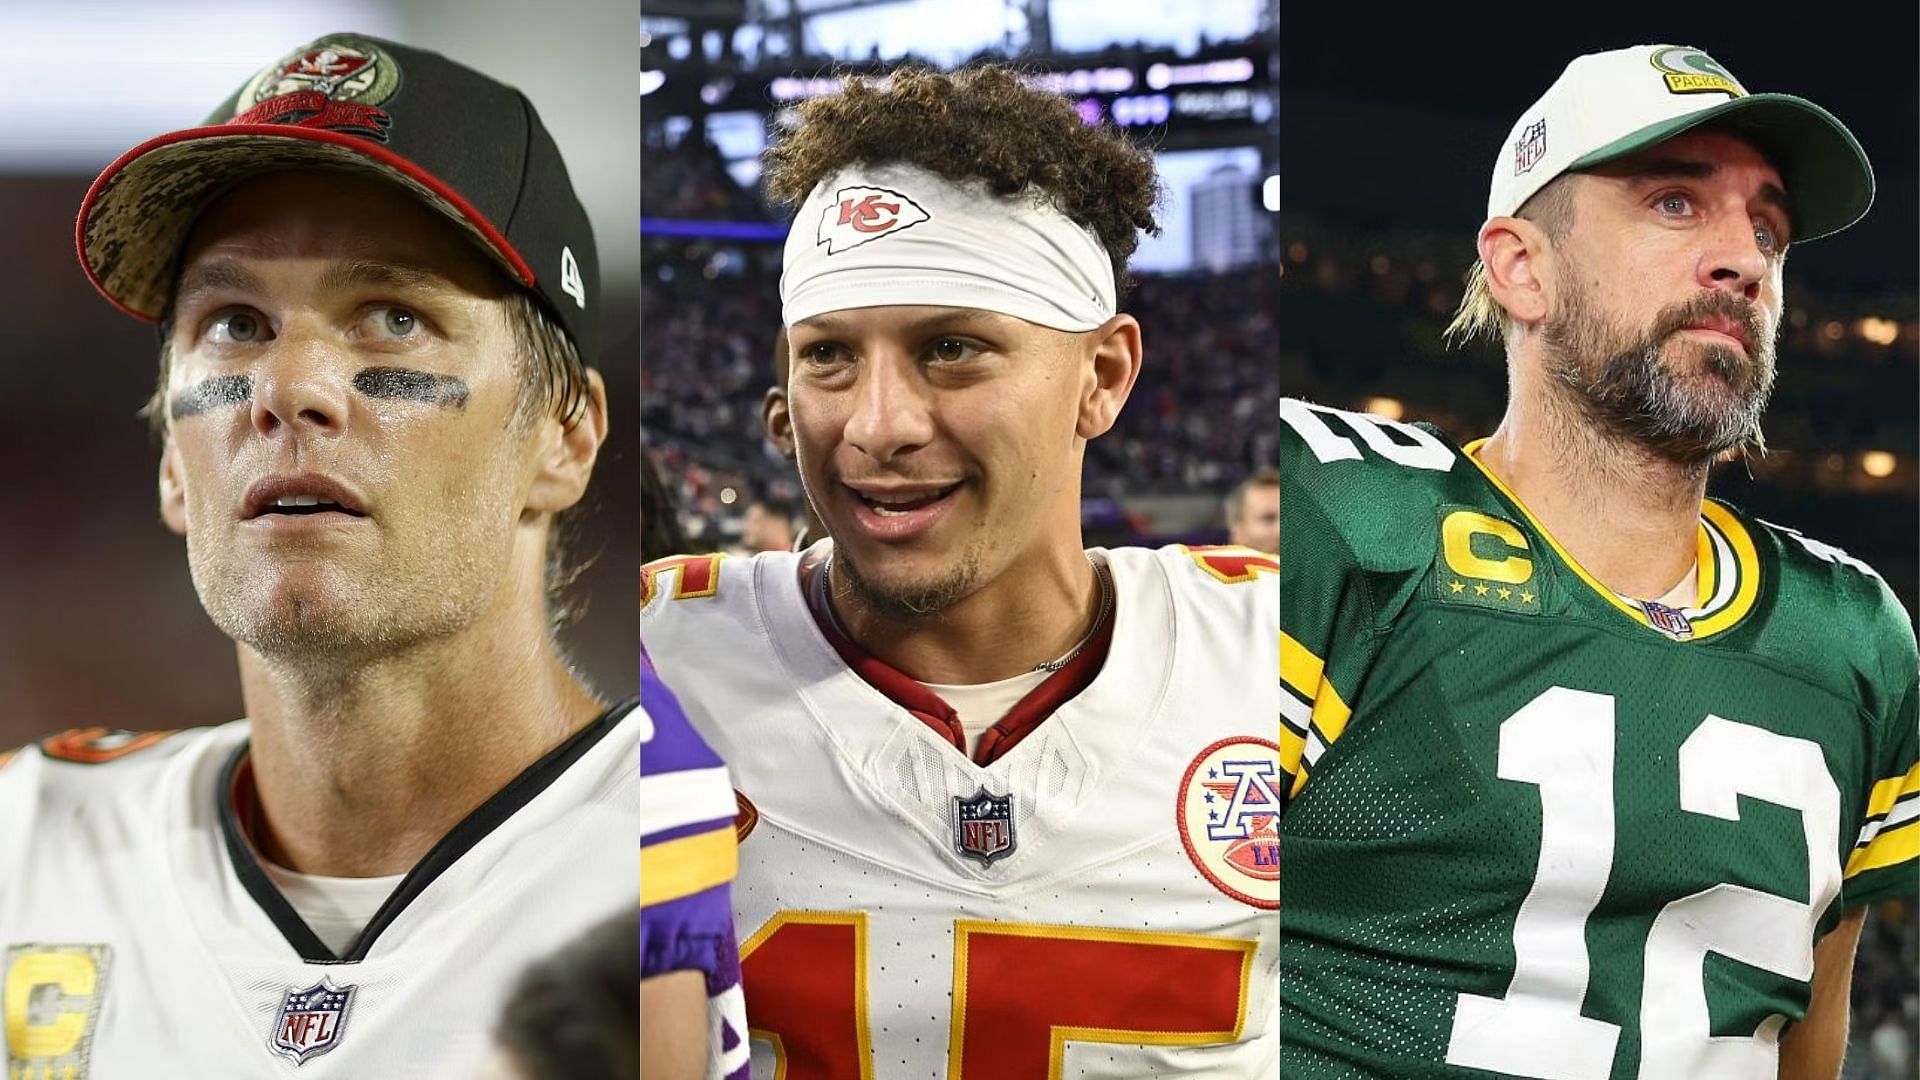 On Sunday, Patrick Mahomes surpassed Tom Brady and Aaron Rodgers for NFL history